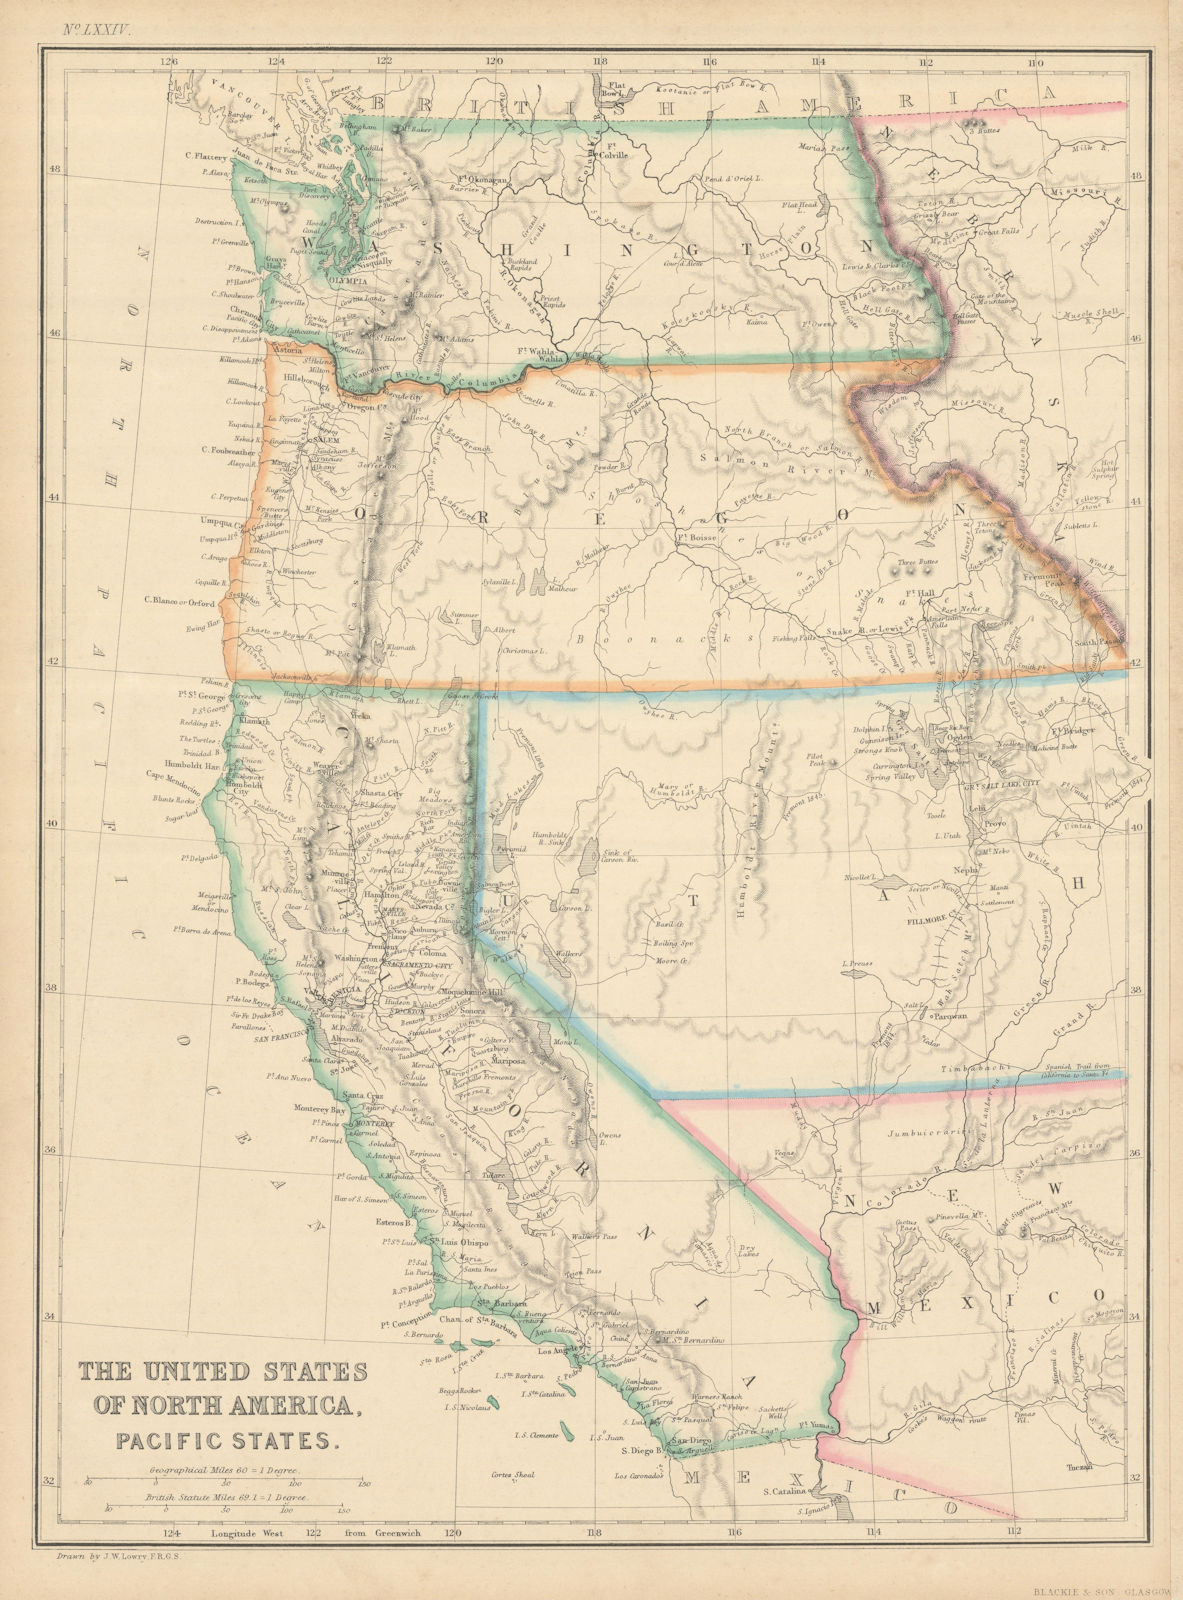 United States of North America, Pacific States by Joseph Wilson Lowry 1860 map